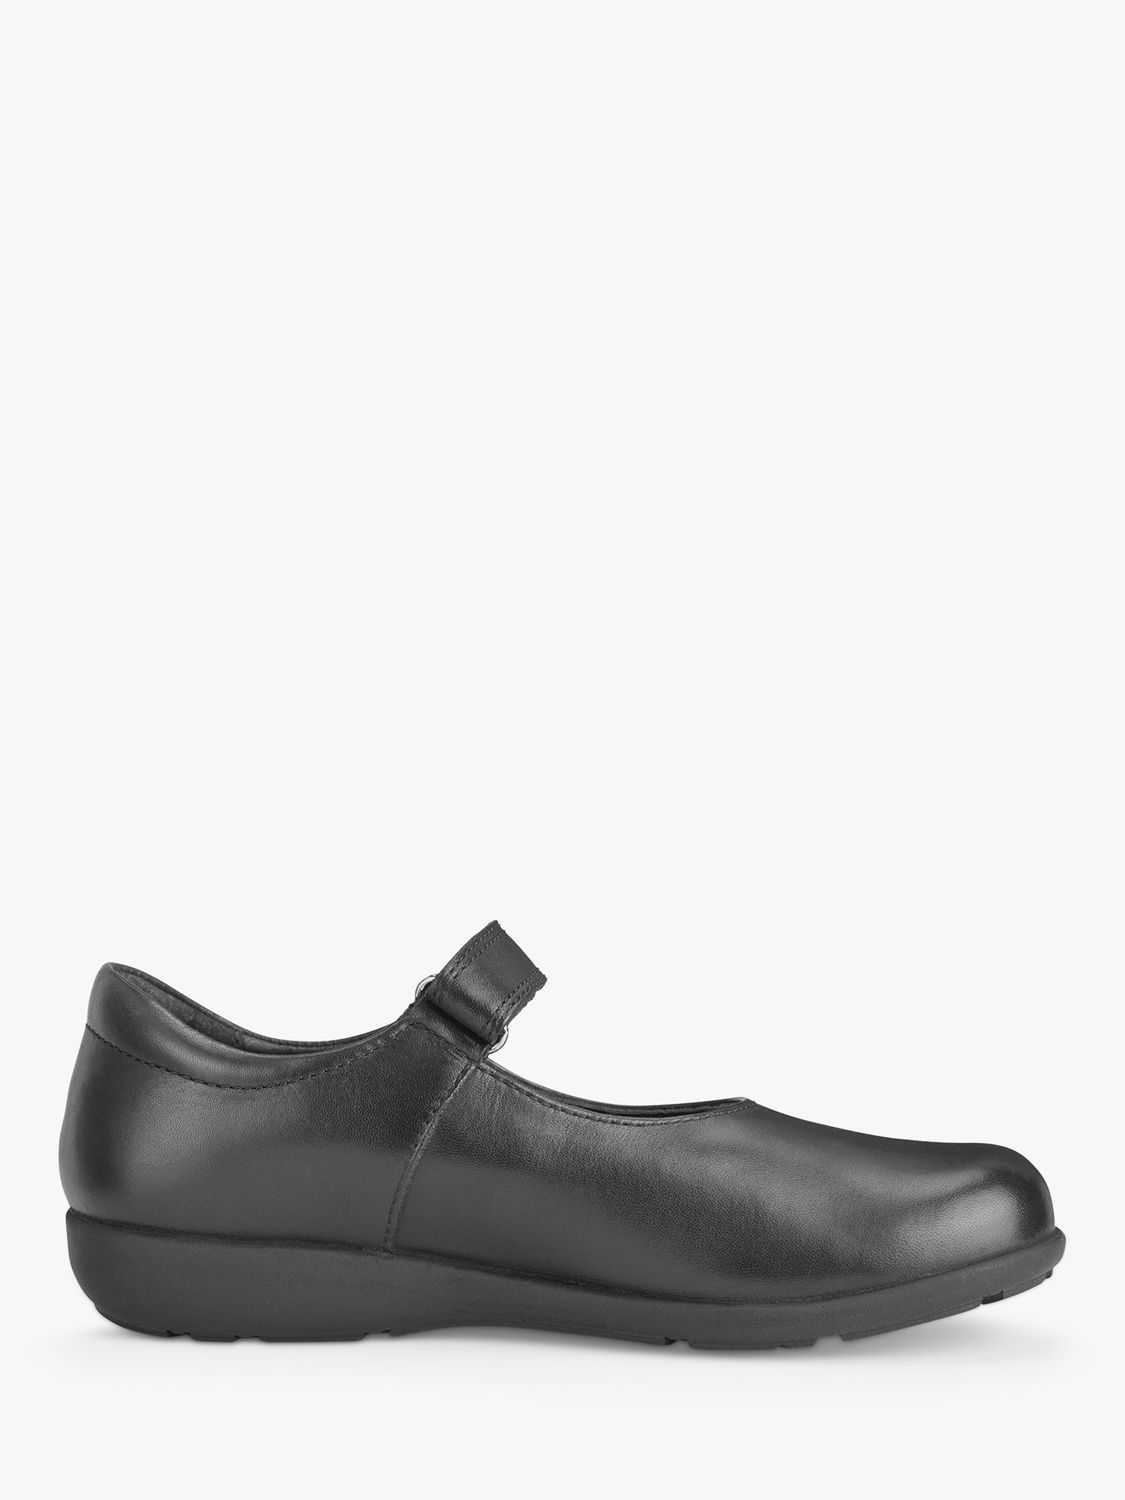 Buy Simply by Start-Rite Kids' Classroom Leather School Shoes, Black Online at johnlewis.com